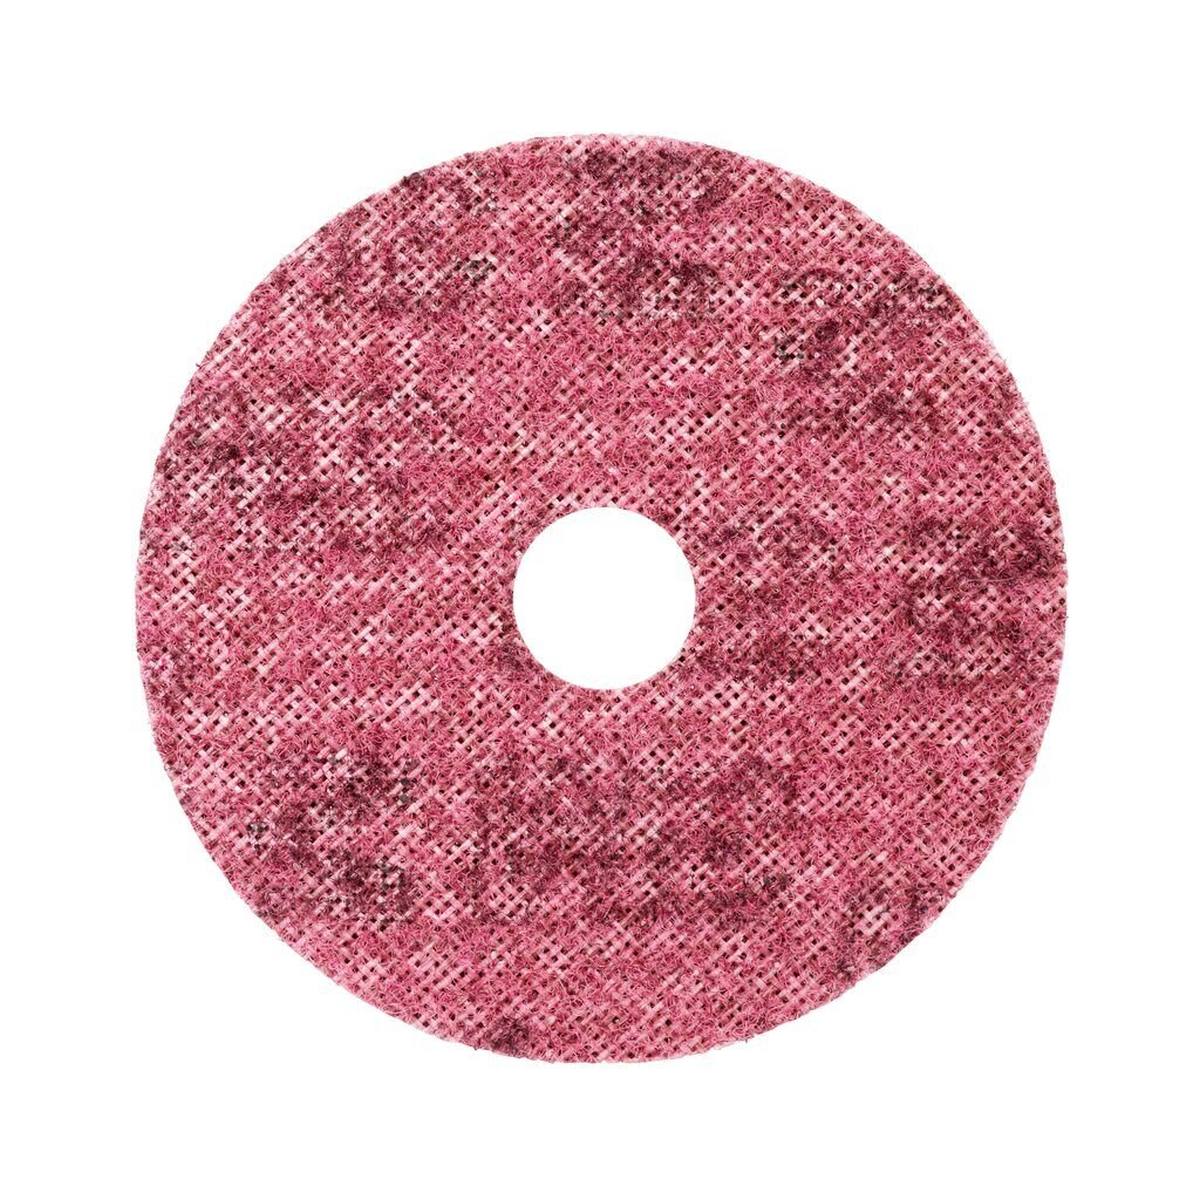 3M Scotch-Brite non-woven disc SC-DH with centering, red, 125 mm, 22 mm, A, medium #246606